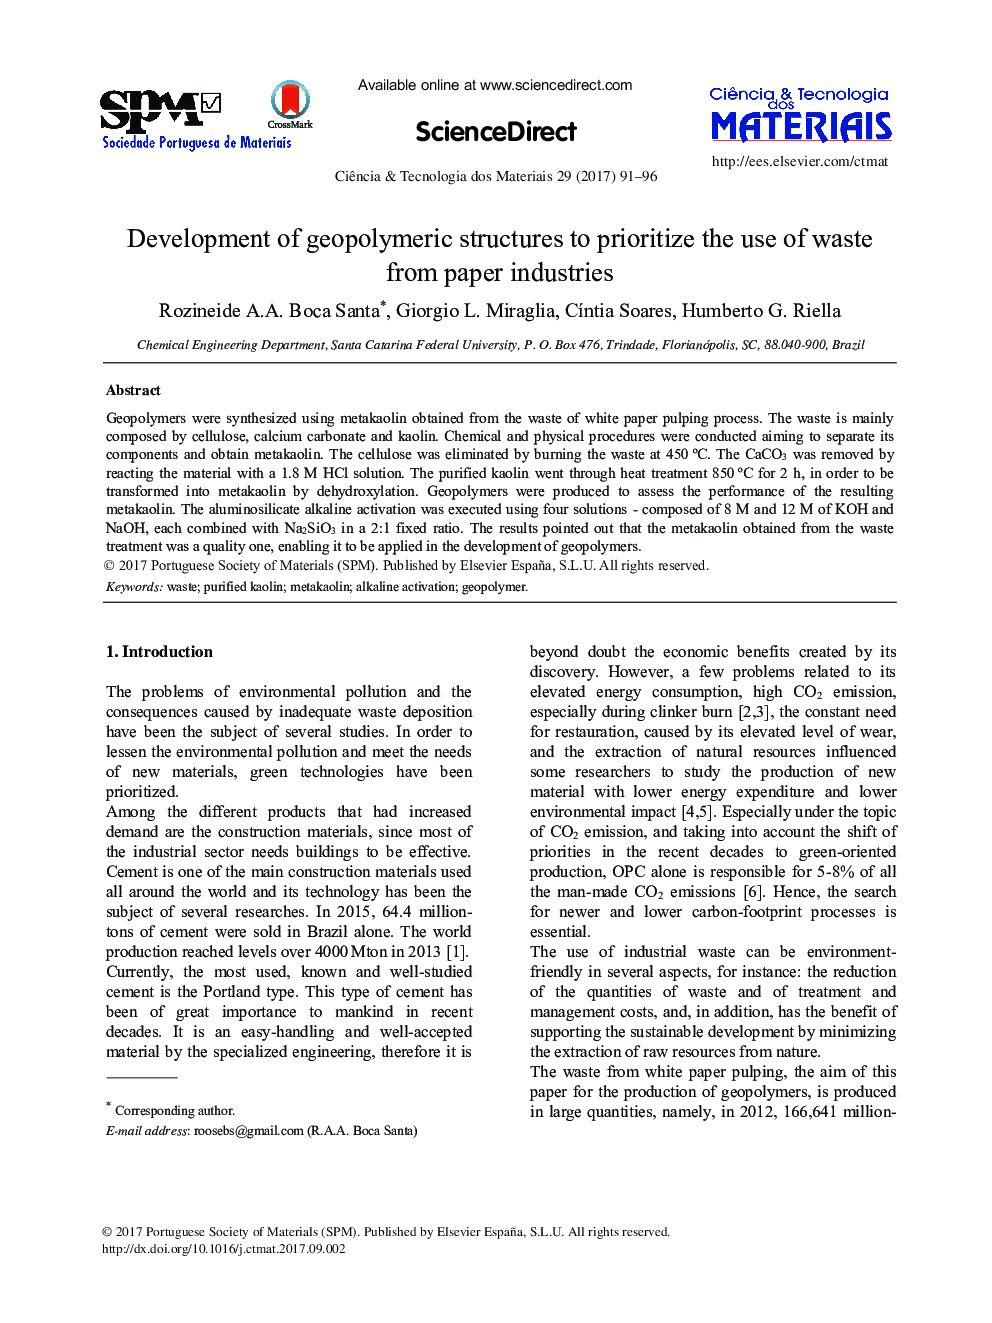 Development of geopolymeric structures to prioritize the use of waste from paper industries